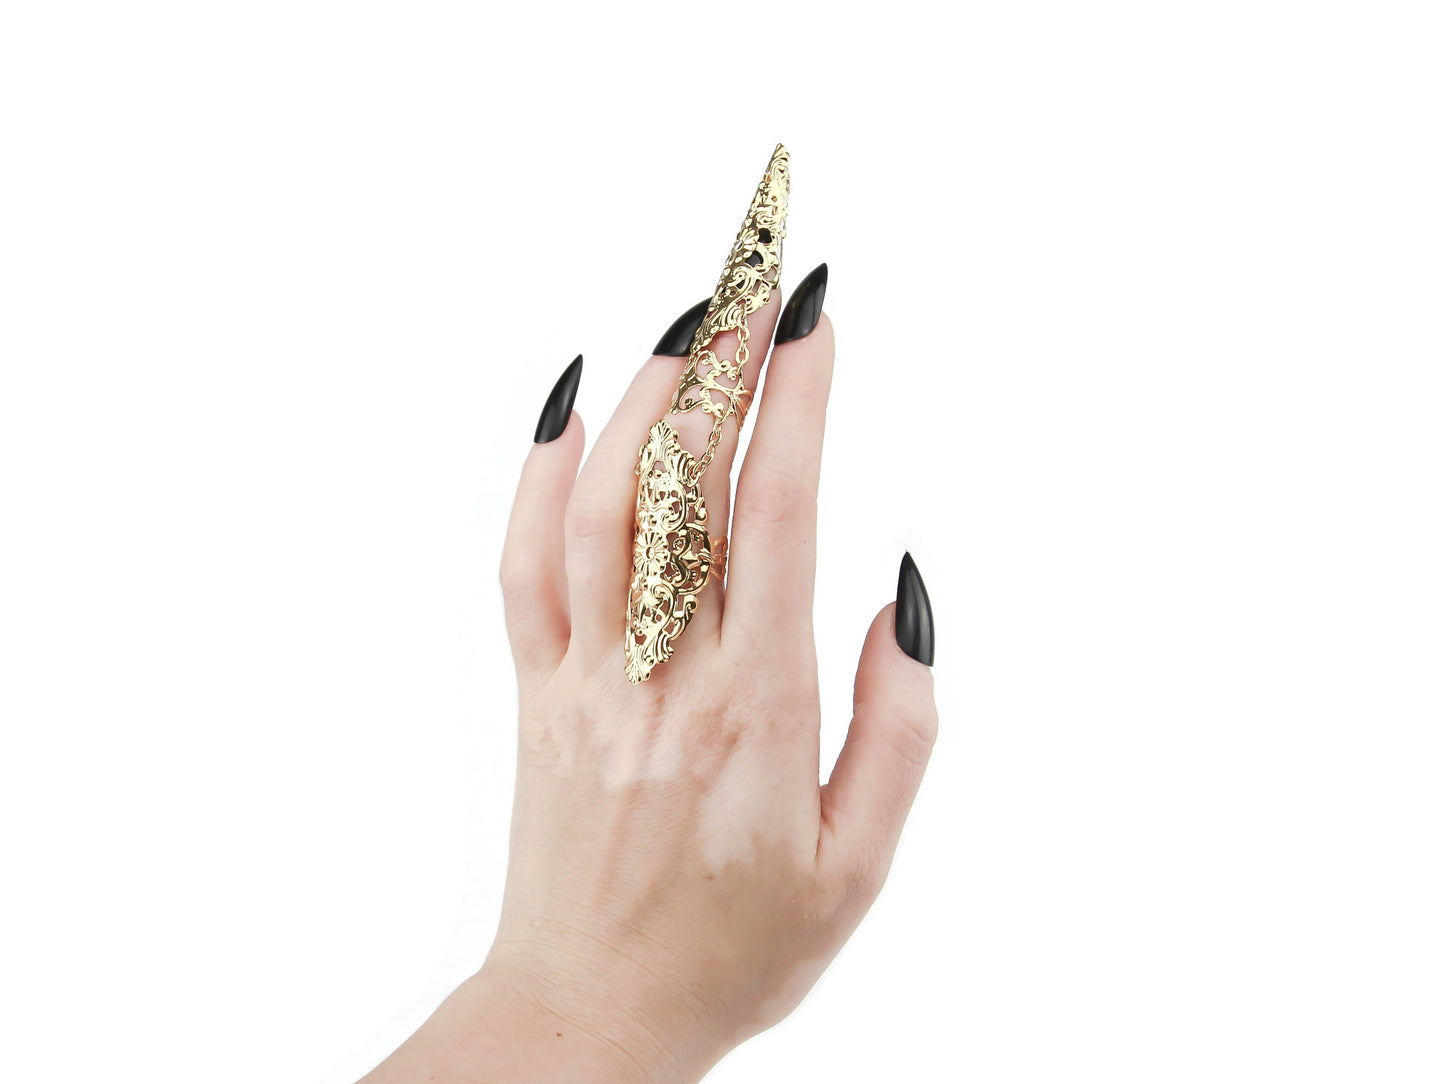 Alt text: "An elegant hand with black polished nails showcases a stunning Myril Jewels finger armor ring, a hallmark of dark-avantgarde style. The gold ring features elaborate filigree details, embodying the gothic and alternative aesthetic, perfect for those who dare to express their individuality with bold Italian craftsmanship.